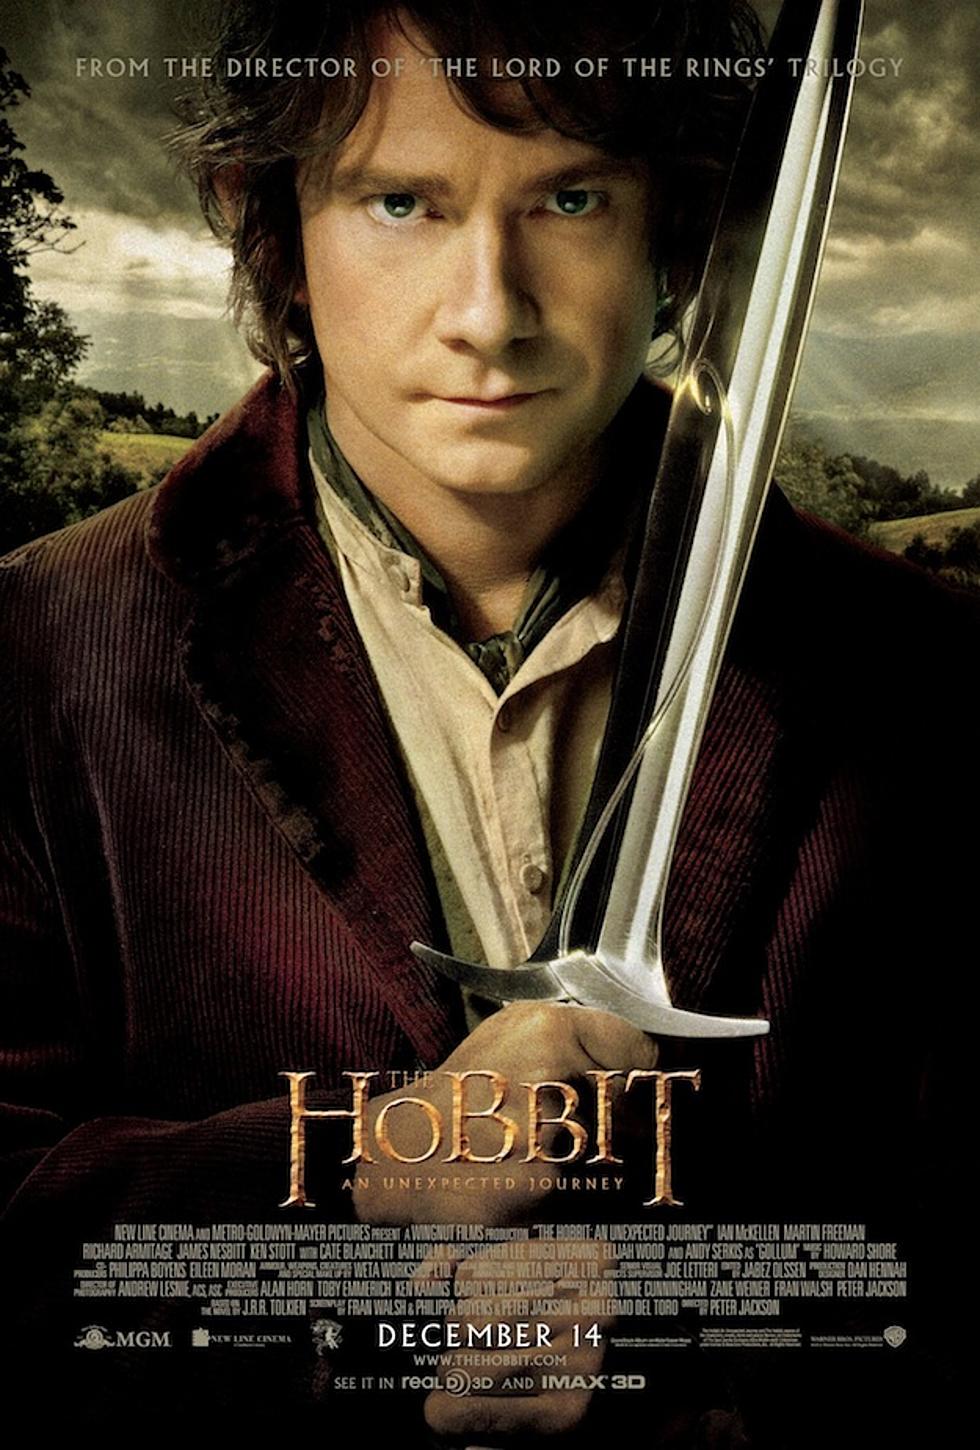 New ‘The Hobbit’ Poster Looks a Little Familiar